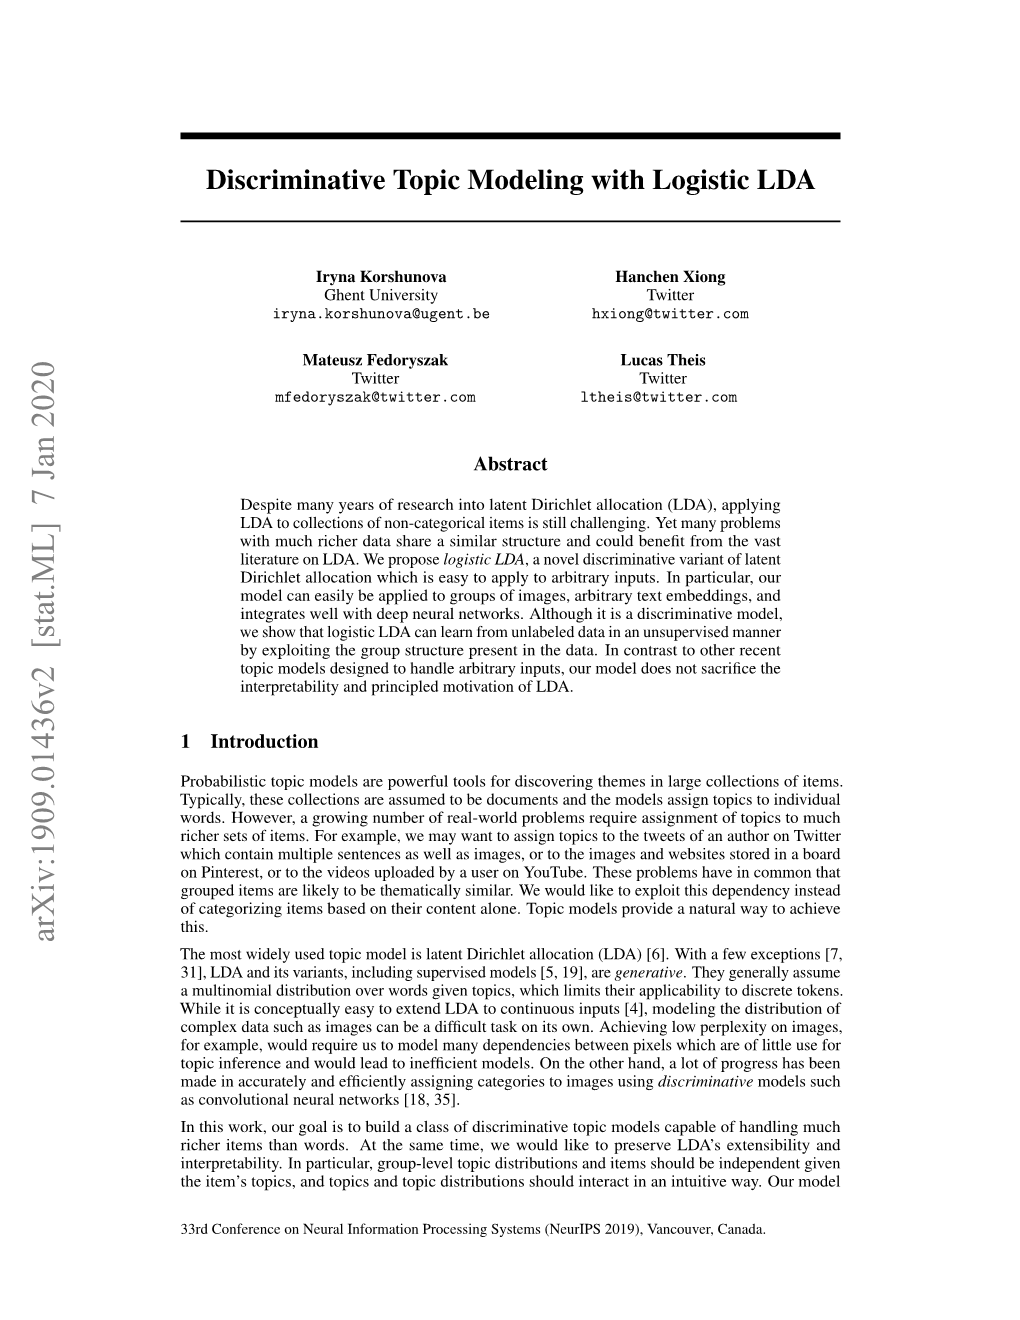 Discriminative Topic Modeling with Logistic LDA